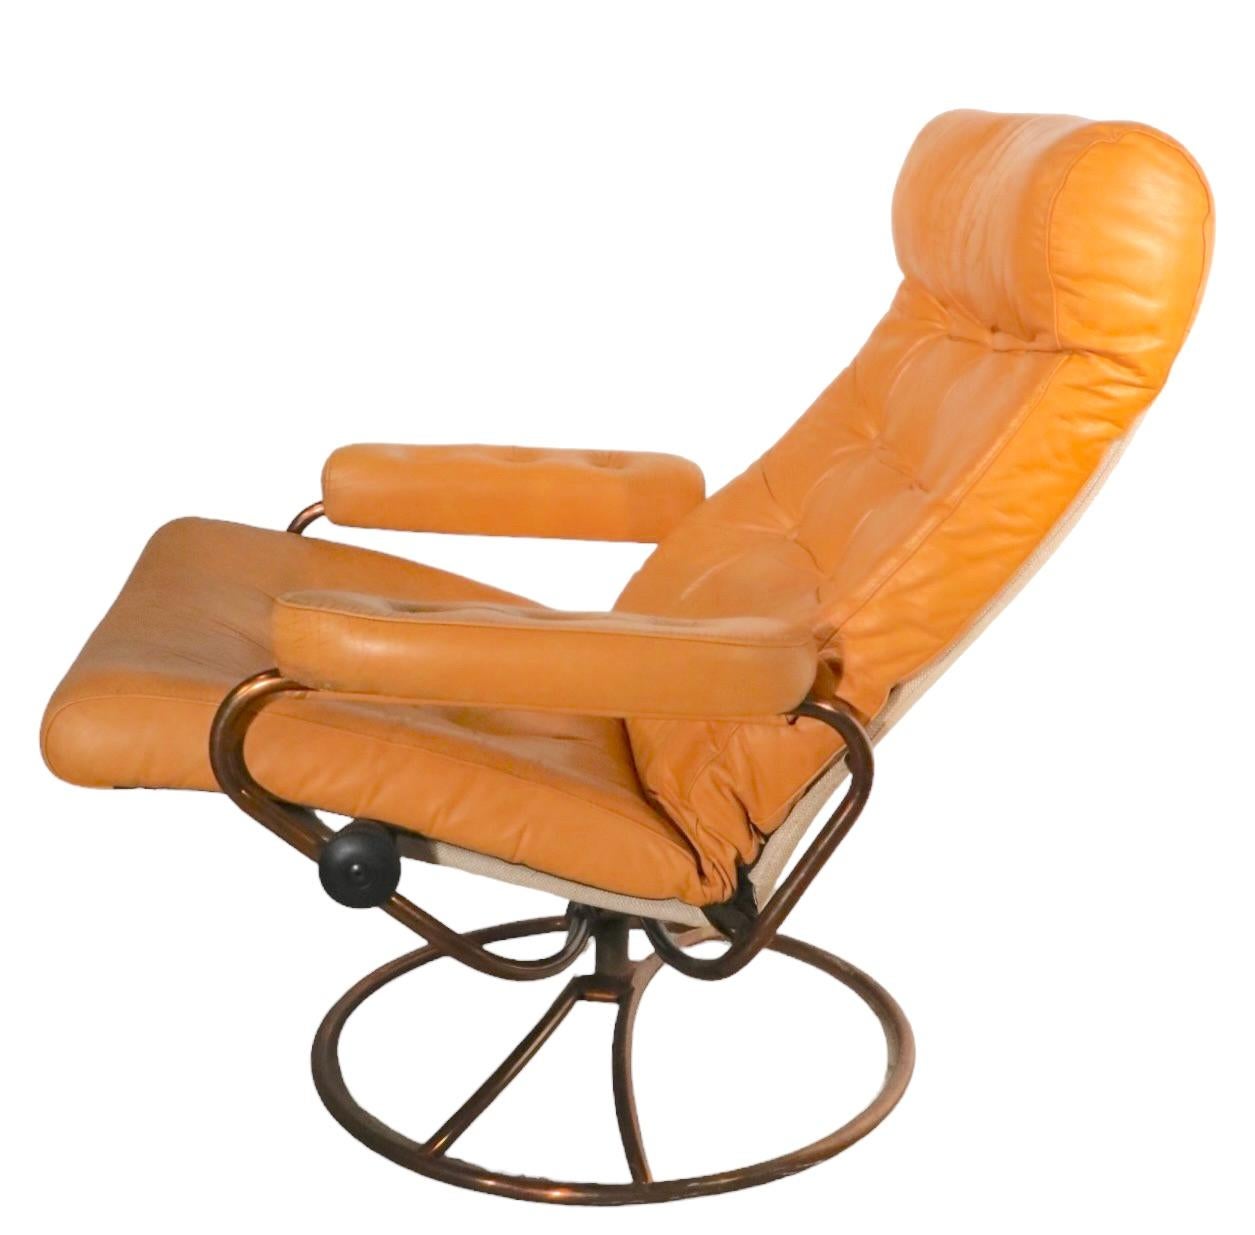 Mid-20th Century Vintage Ekornes Stressless Leather Swivel Reclining Lounge Chair and Ottoman